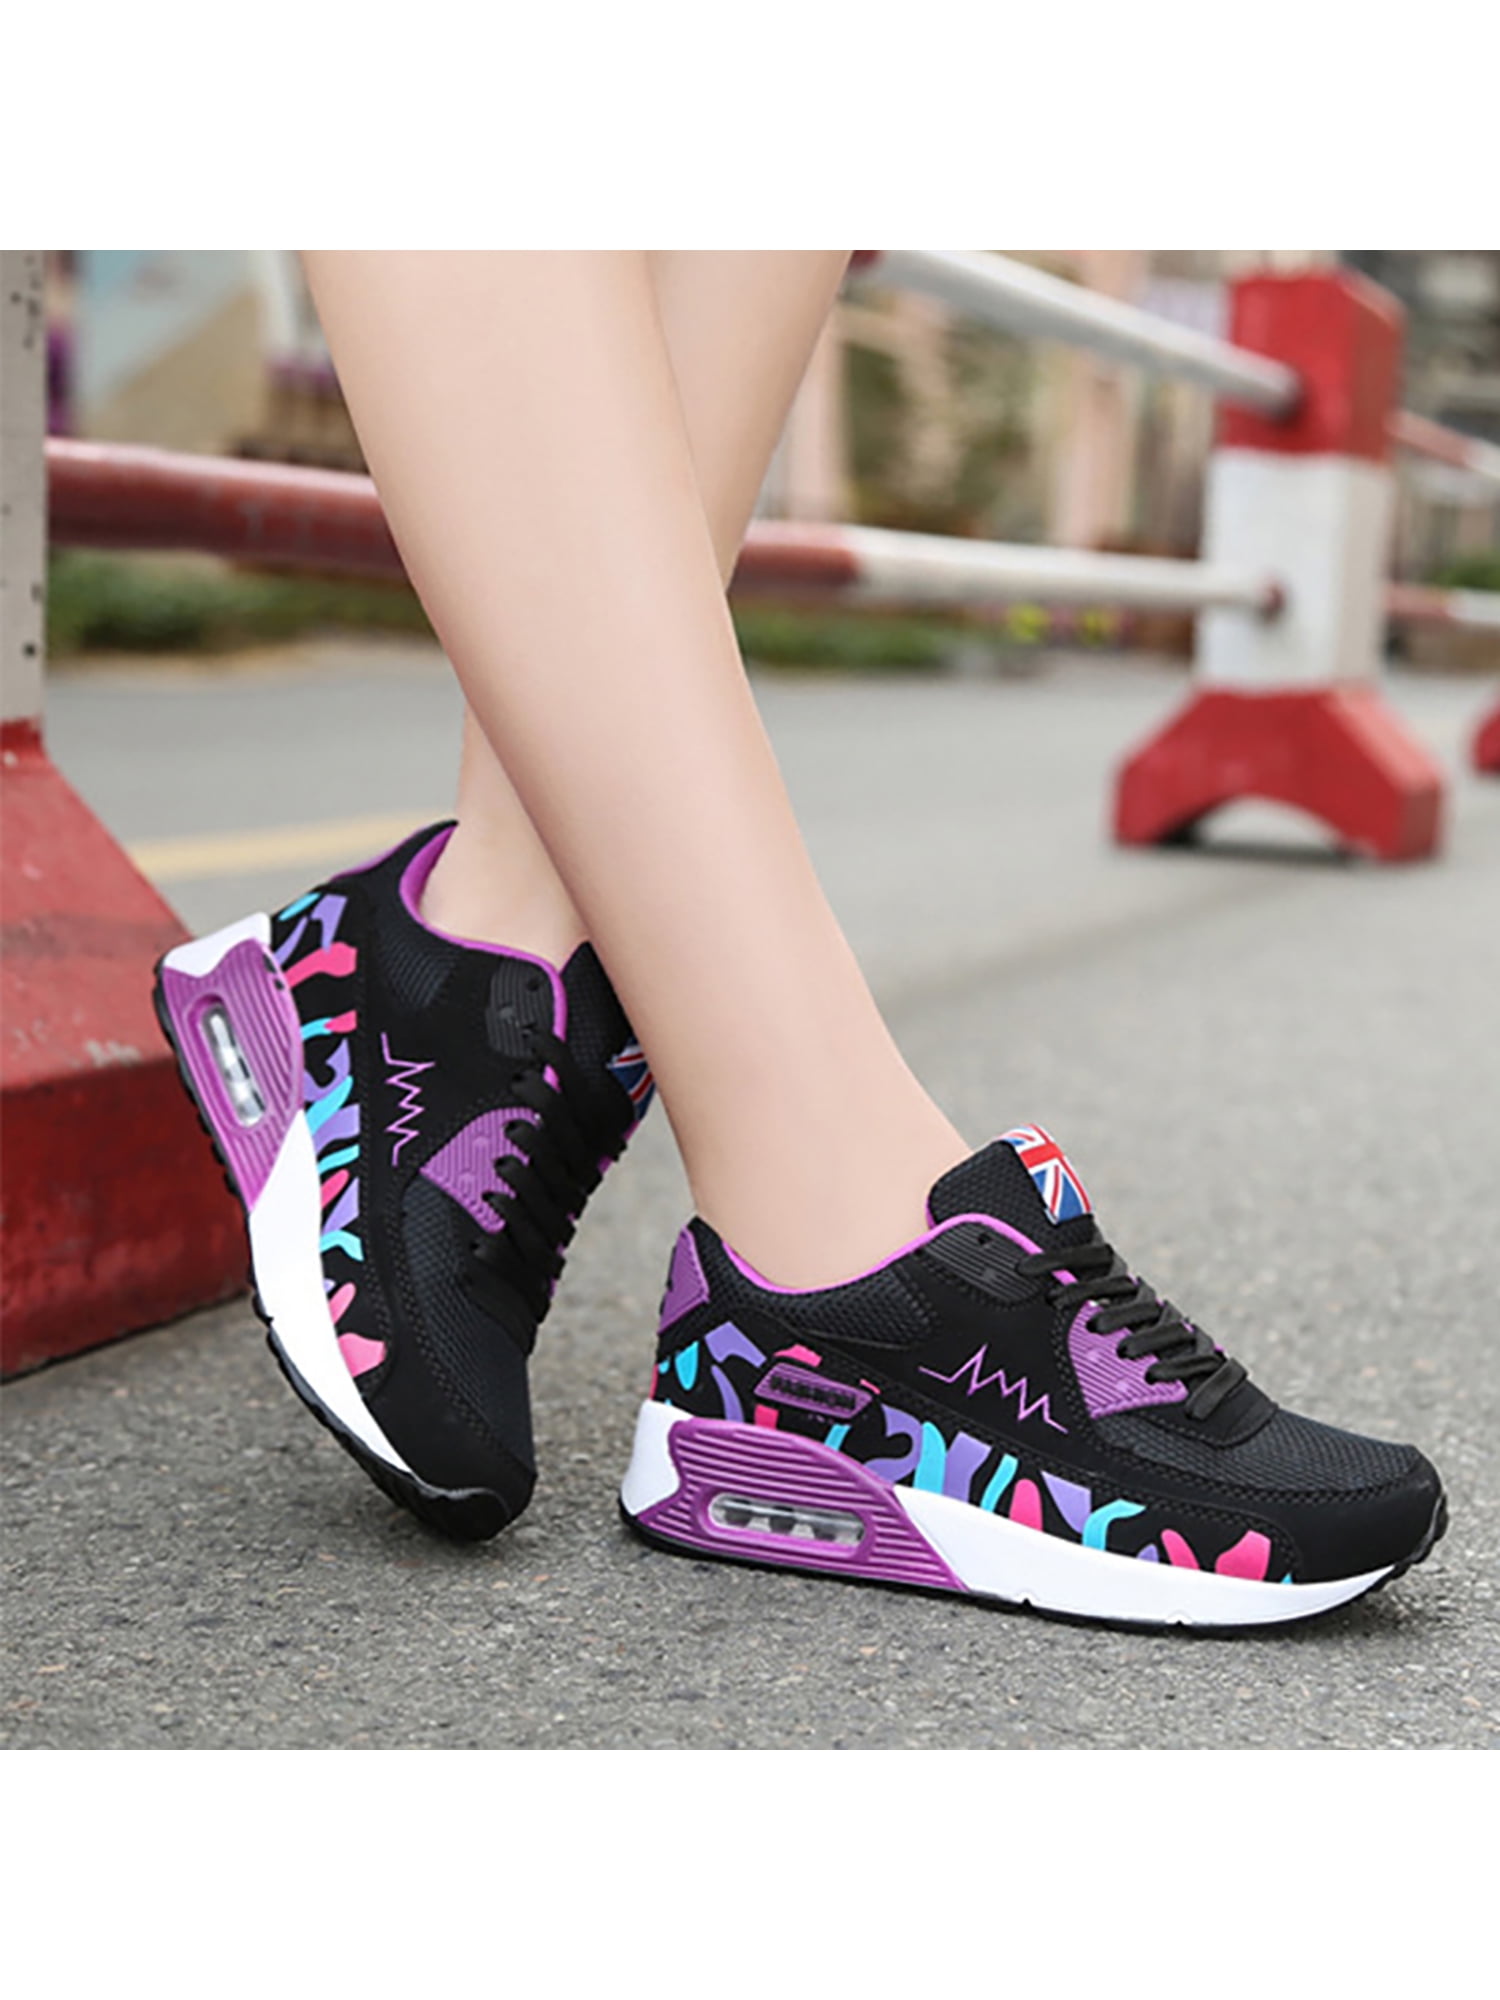 NEW WOMENS LACE UP GYM RUNNING JOGGING LADIES SPORTS FLORAL TRAINERS SHOES 3-8 